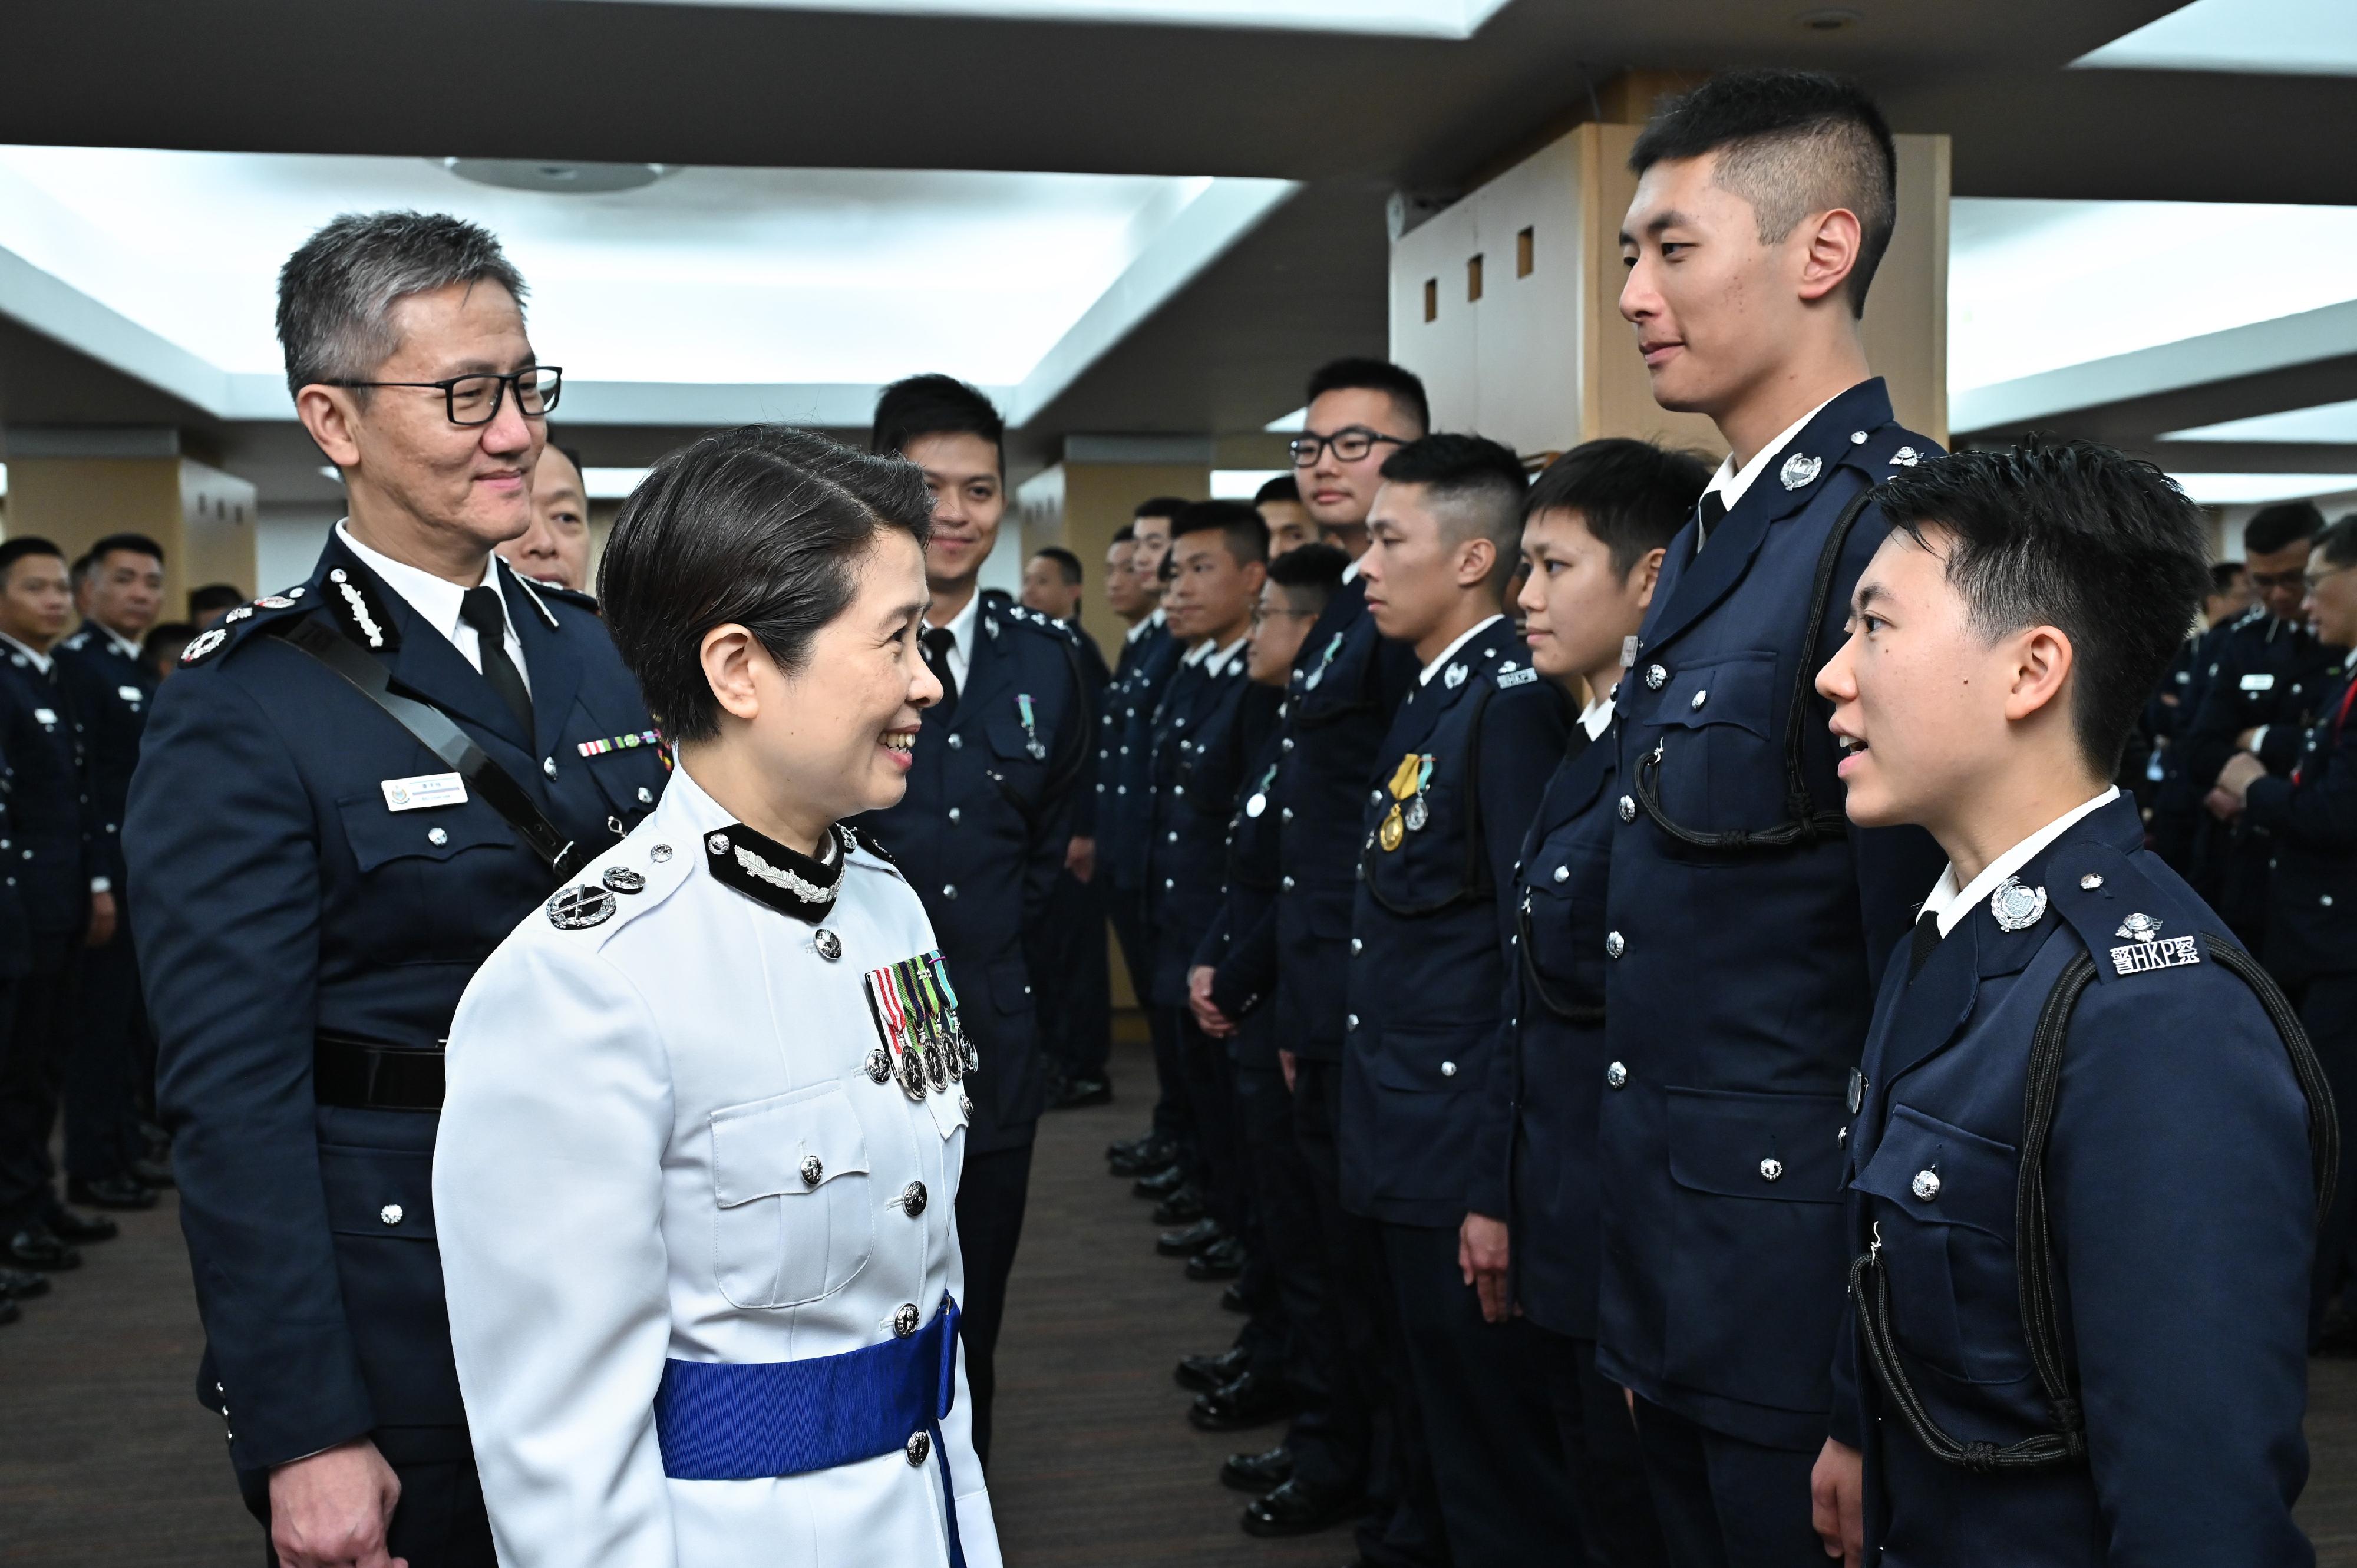 The Commissioner of Police, Mr Siu Chak-yee (first left) and the Deputy Commissioner (National Security), Ms Lau Chi-wai (second left), congratulate probationary inspectors after the passing-out parade held at the Hong Kong Police College today (April 22).